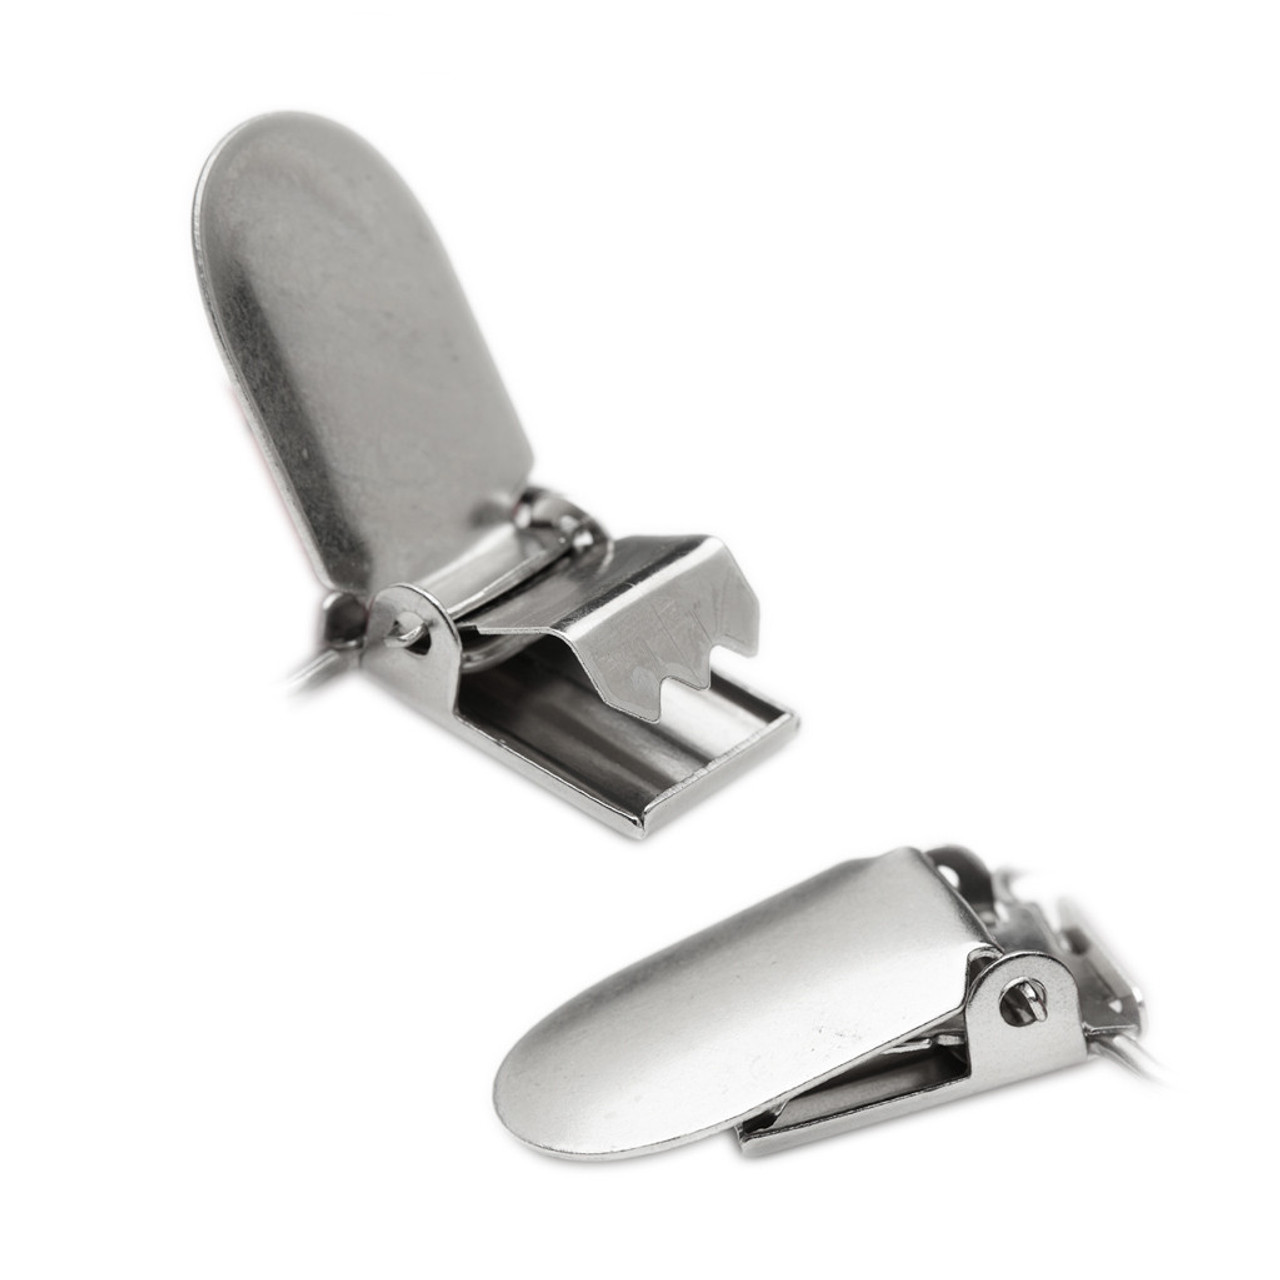 Suspender Clips 1 Nickel - by The Pair